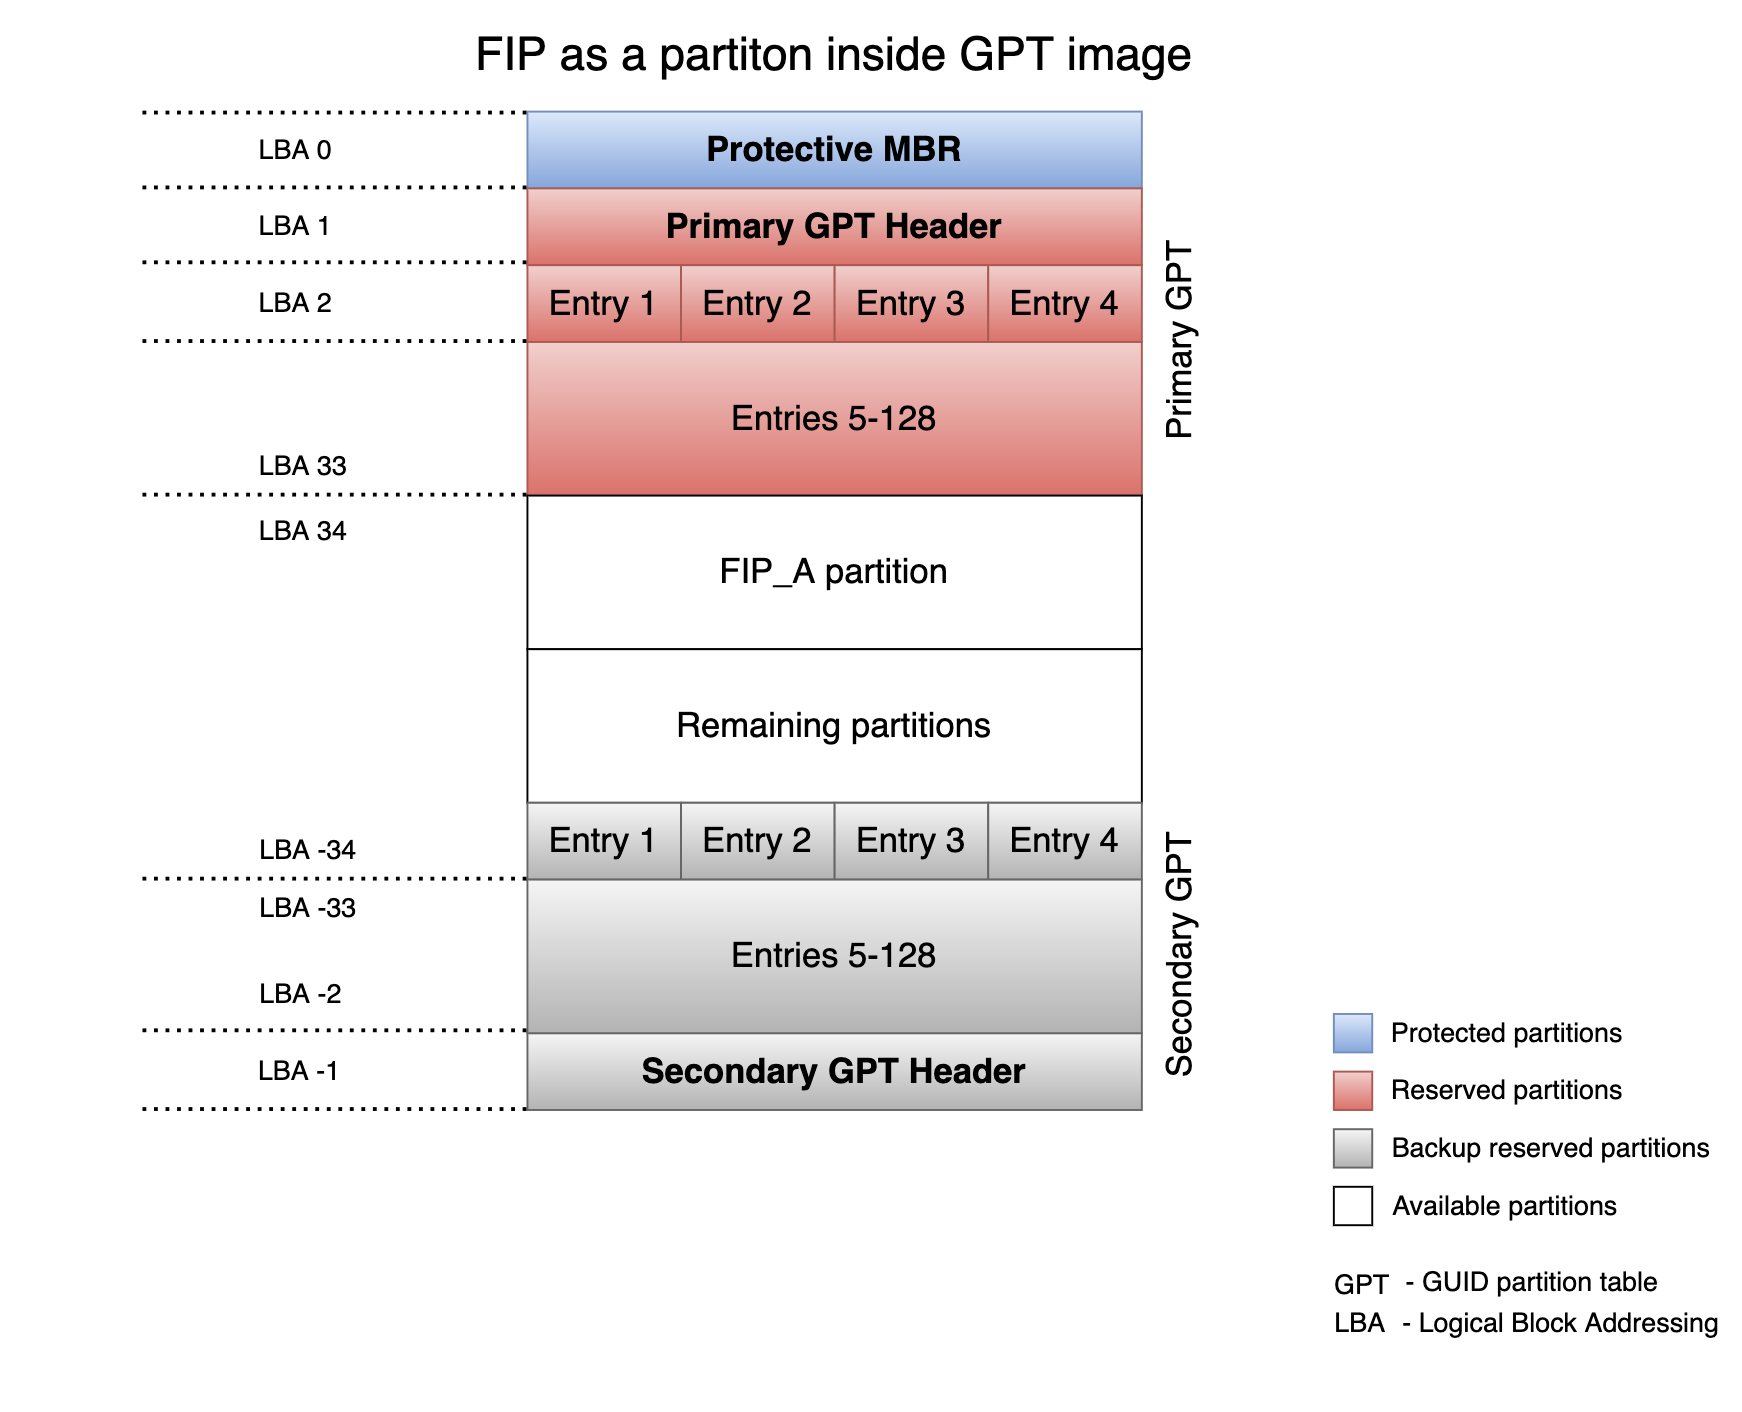 FIP in a GPT image